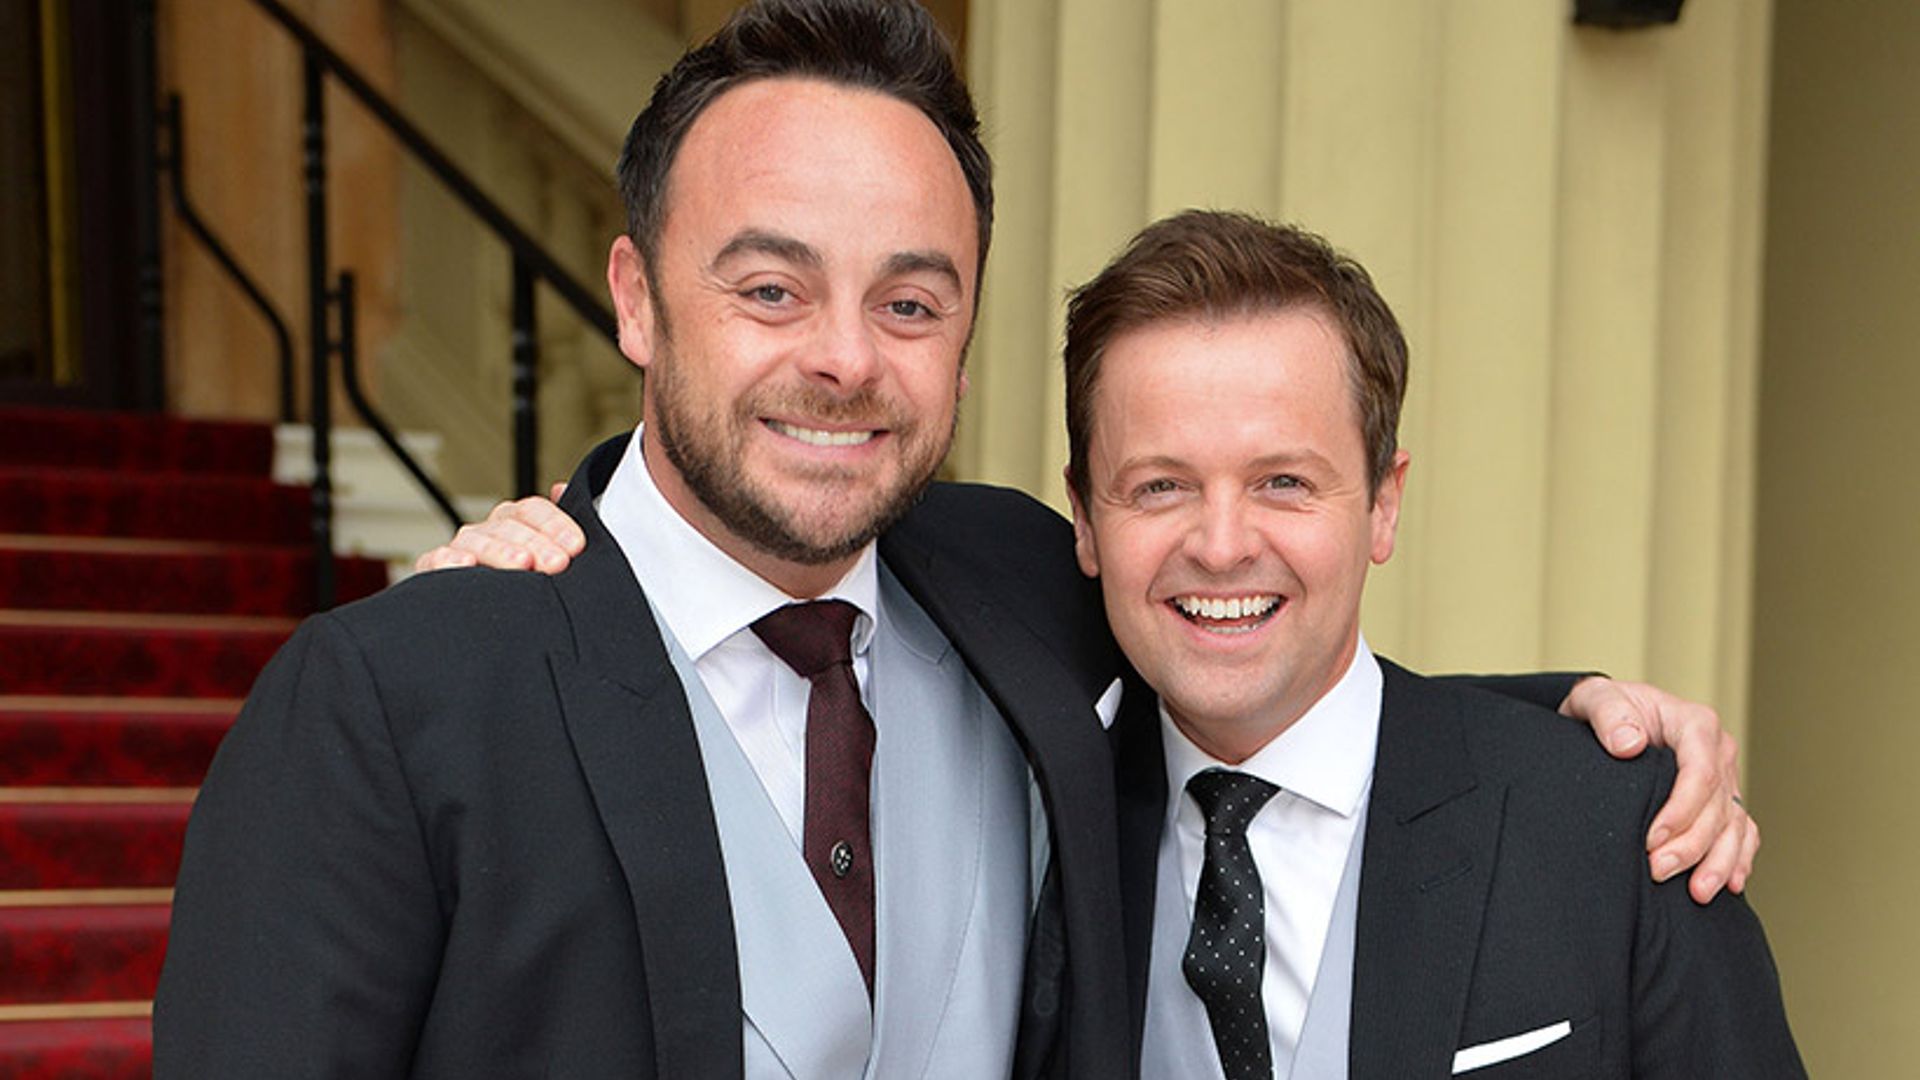 Friends hint Anthony McPartlin will return to I'm a Celeb this year